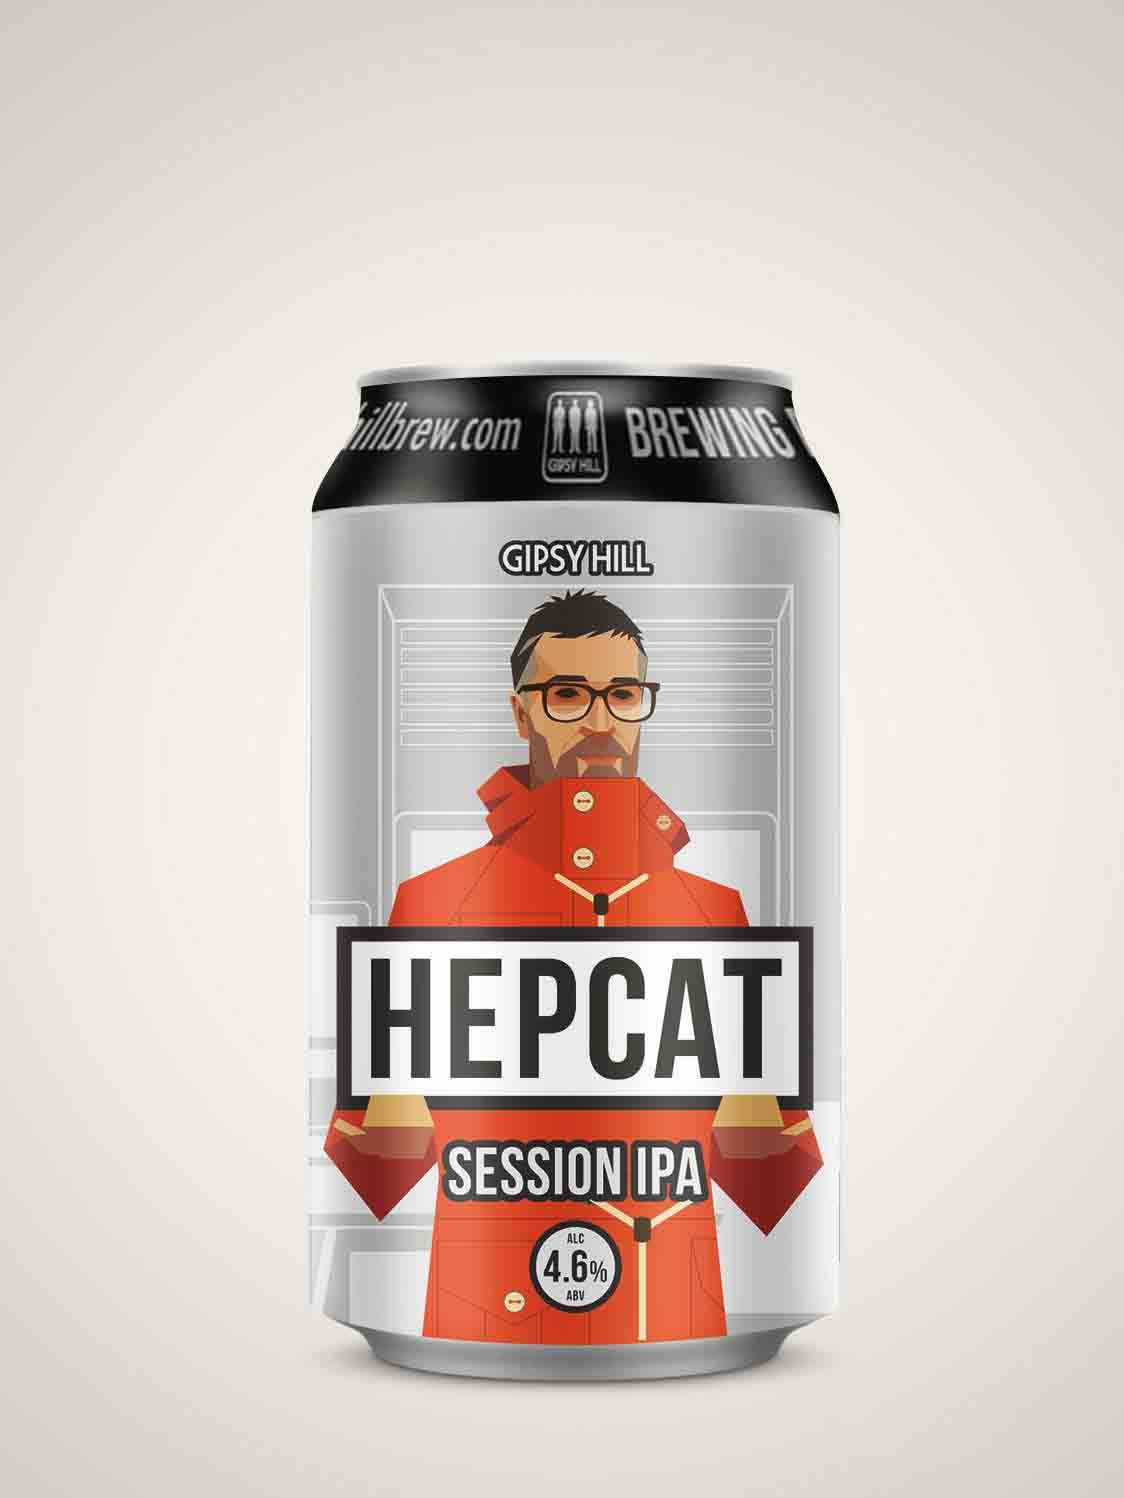 Gipsy Hill - Hepcat Session IPA 4.6%